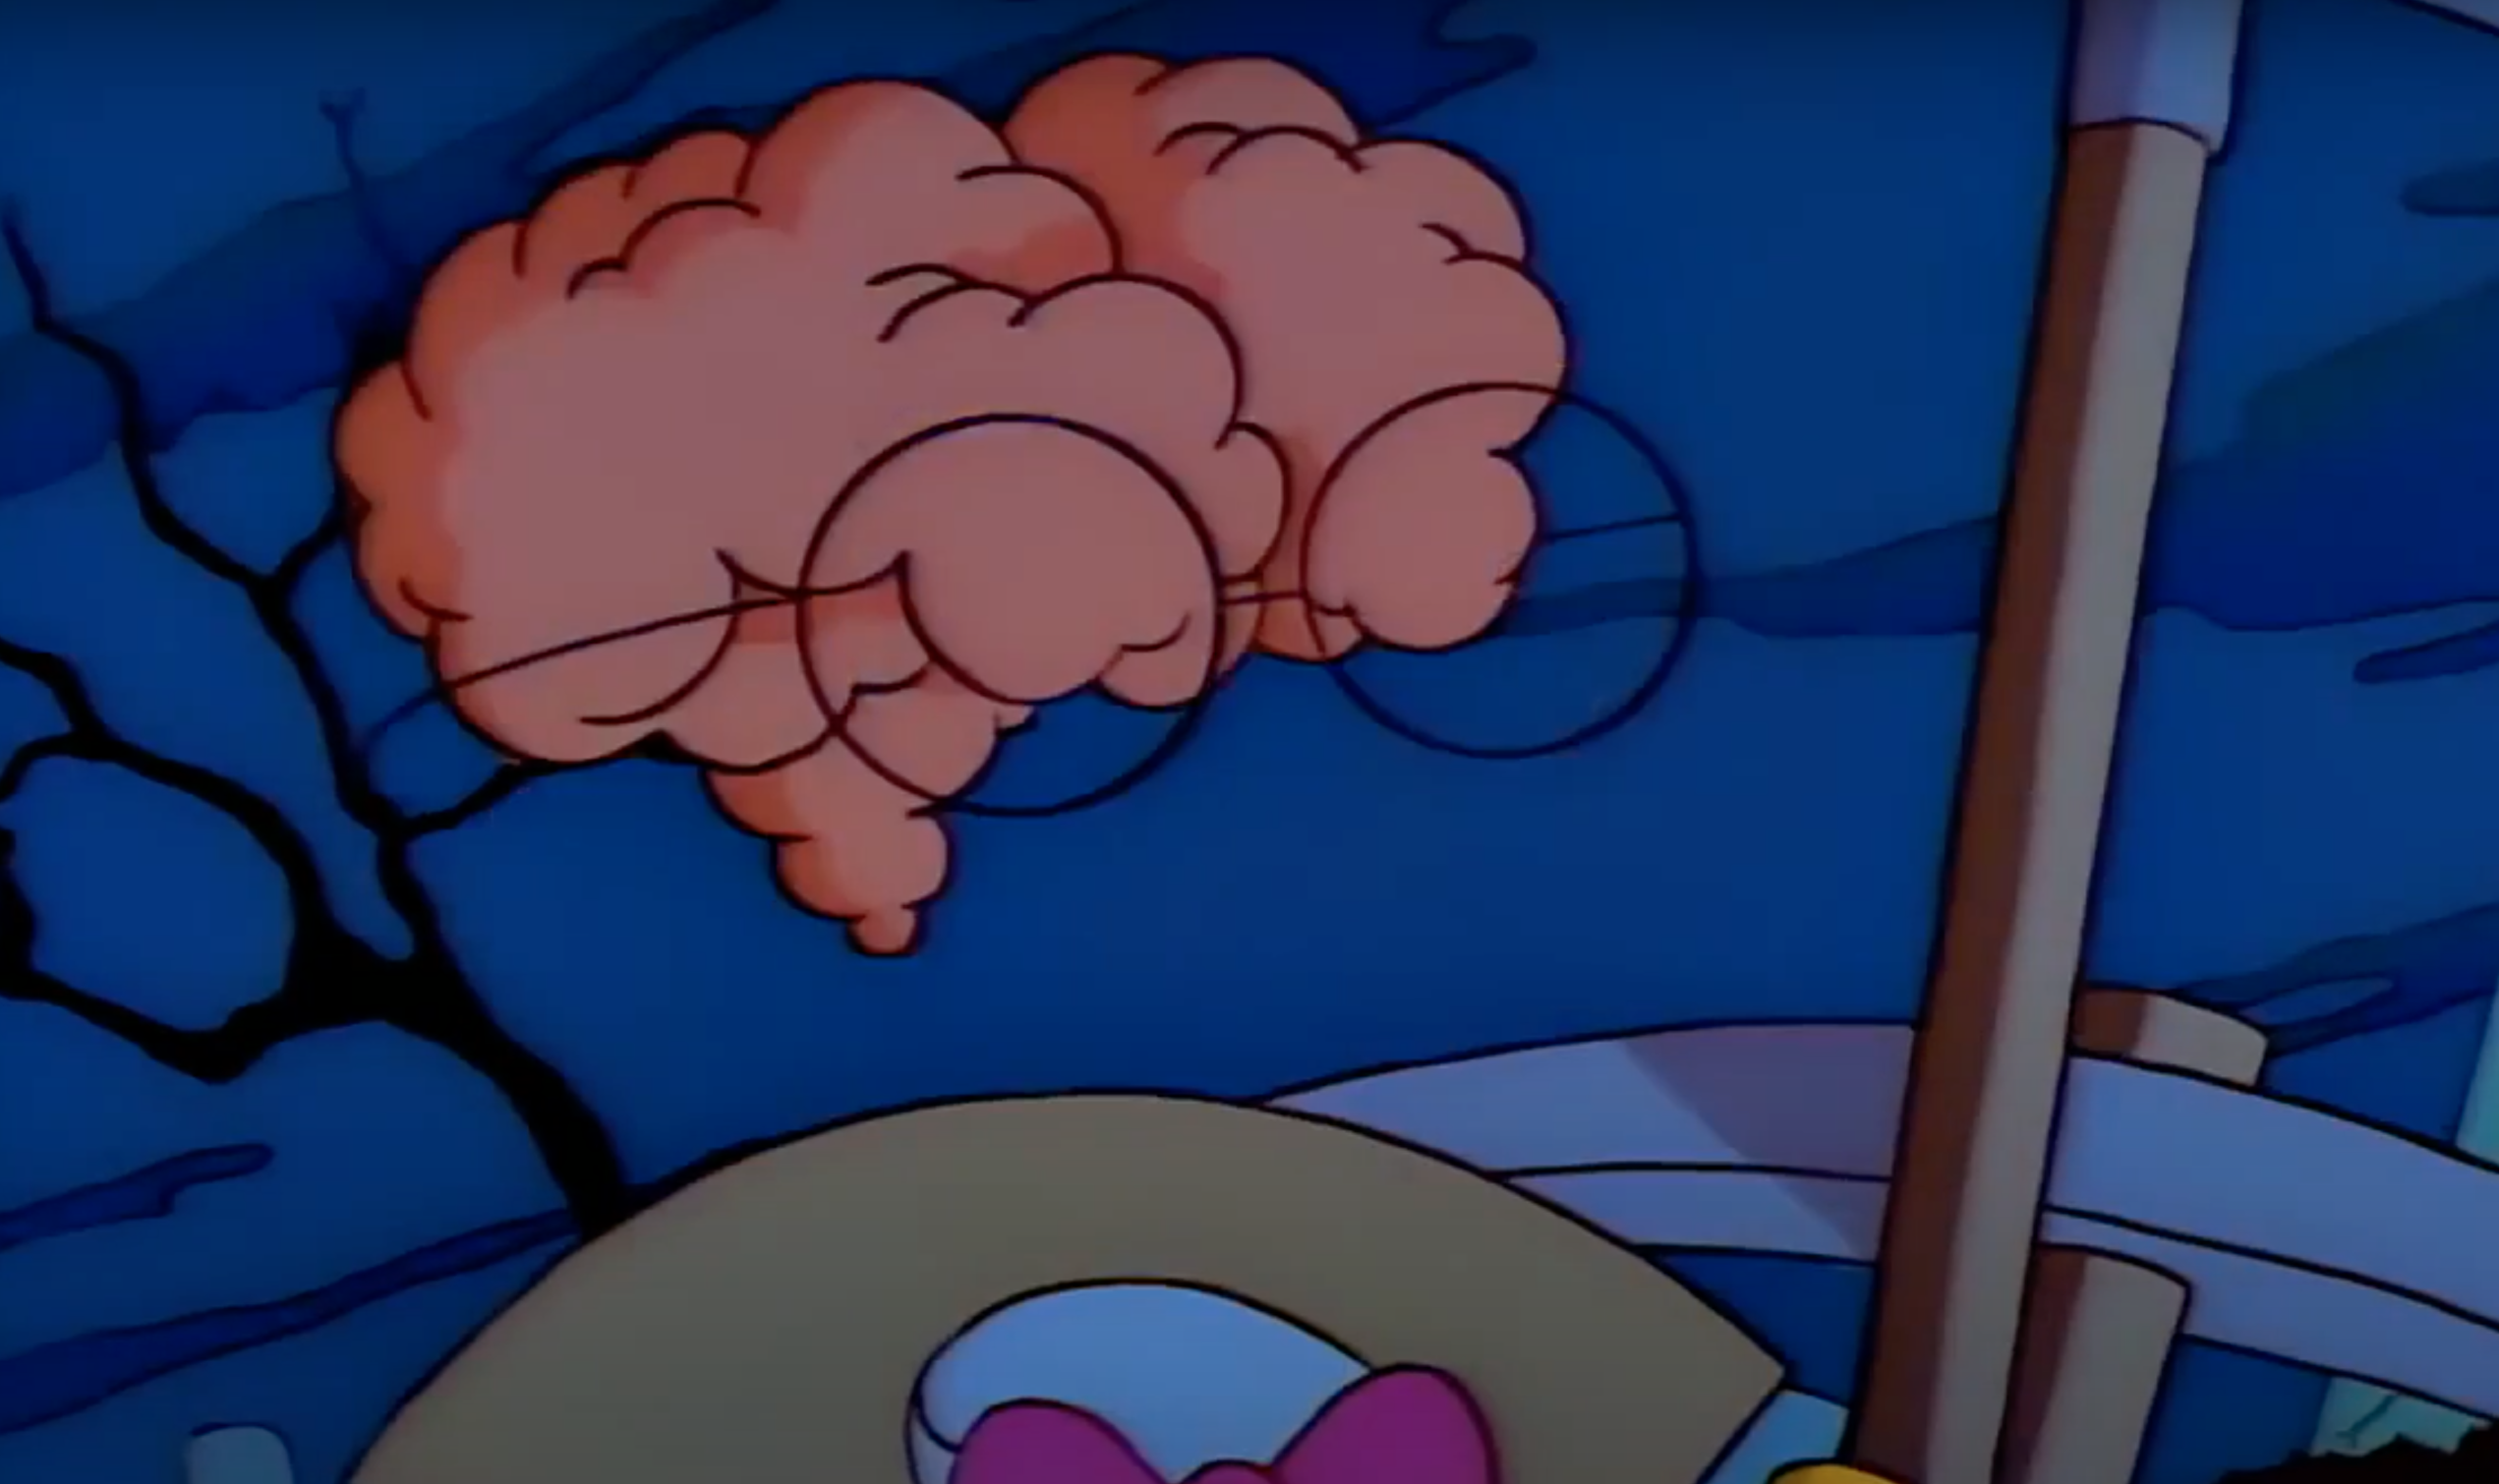 A view of the brain of Waylon Smithers, from The Simpsons.